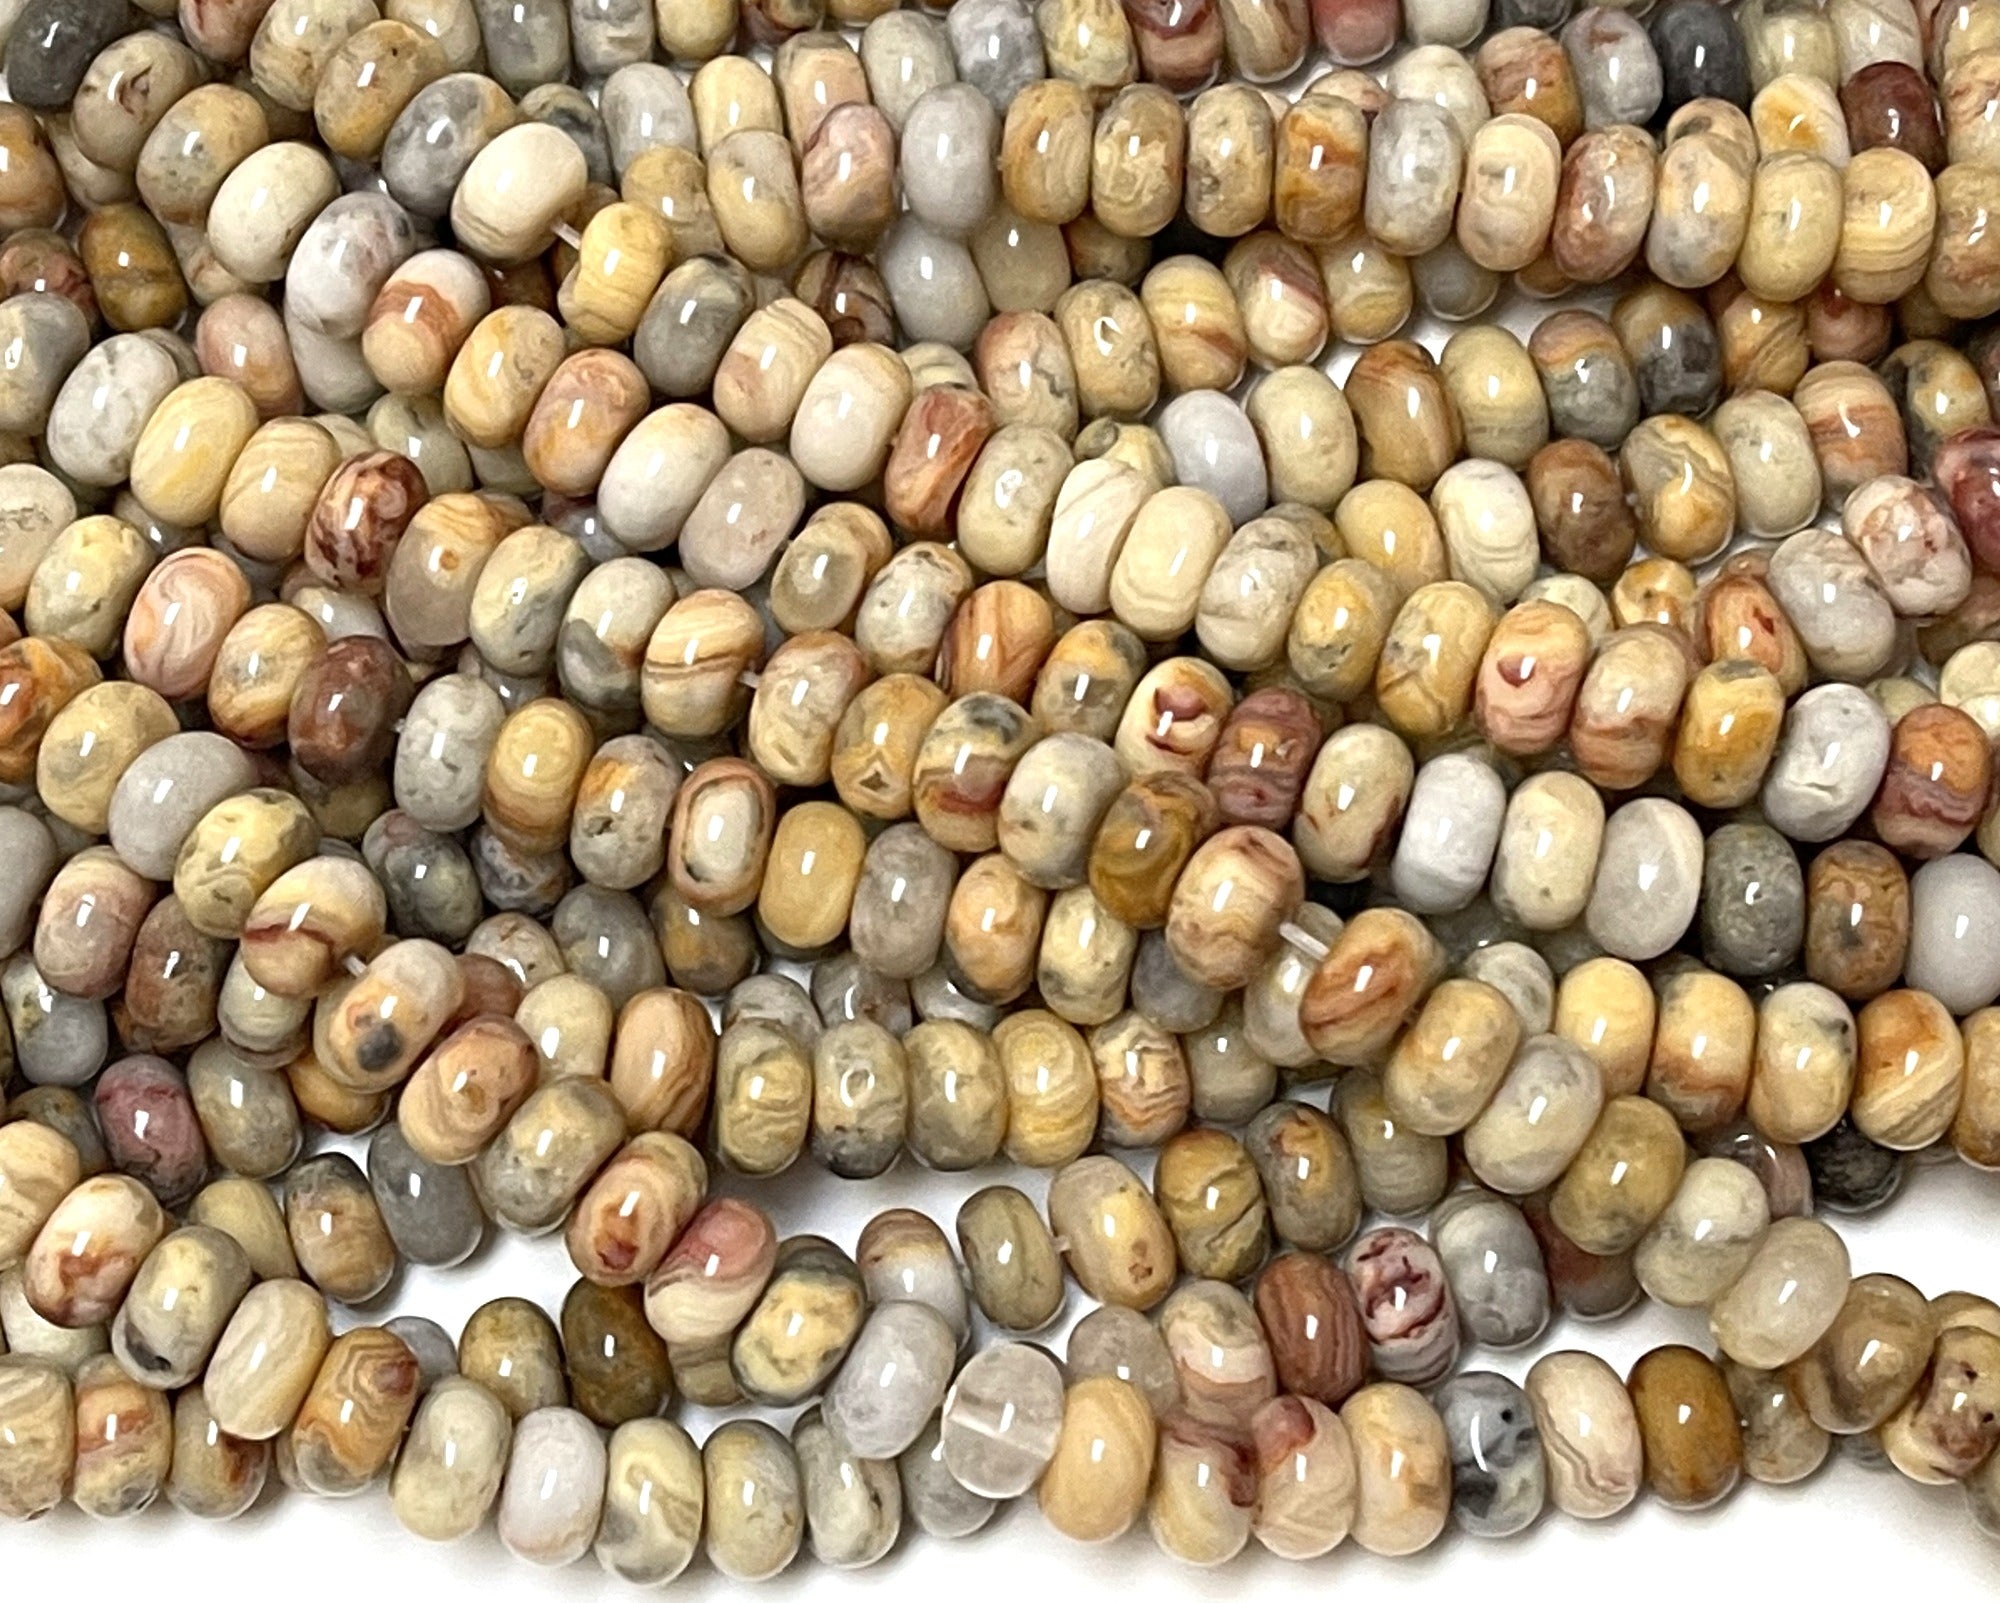 Crazy Lace Agate 8x5mm rondelle natural gemstone beads 16" strand